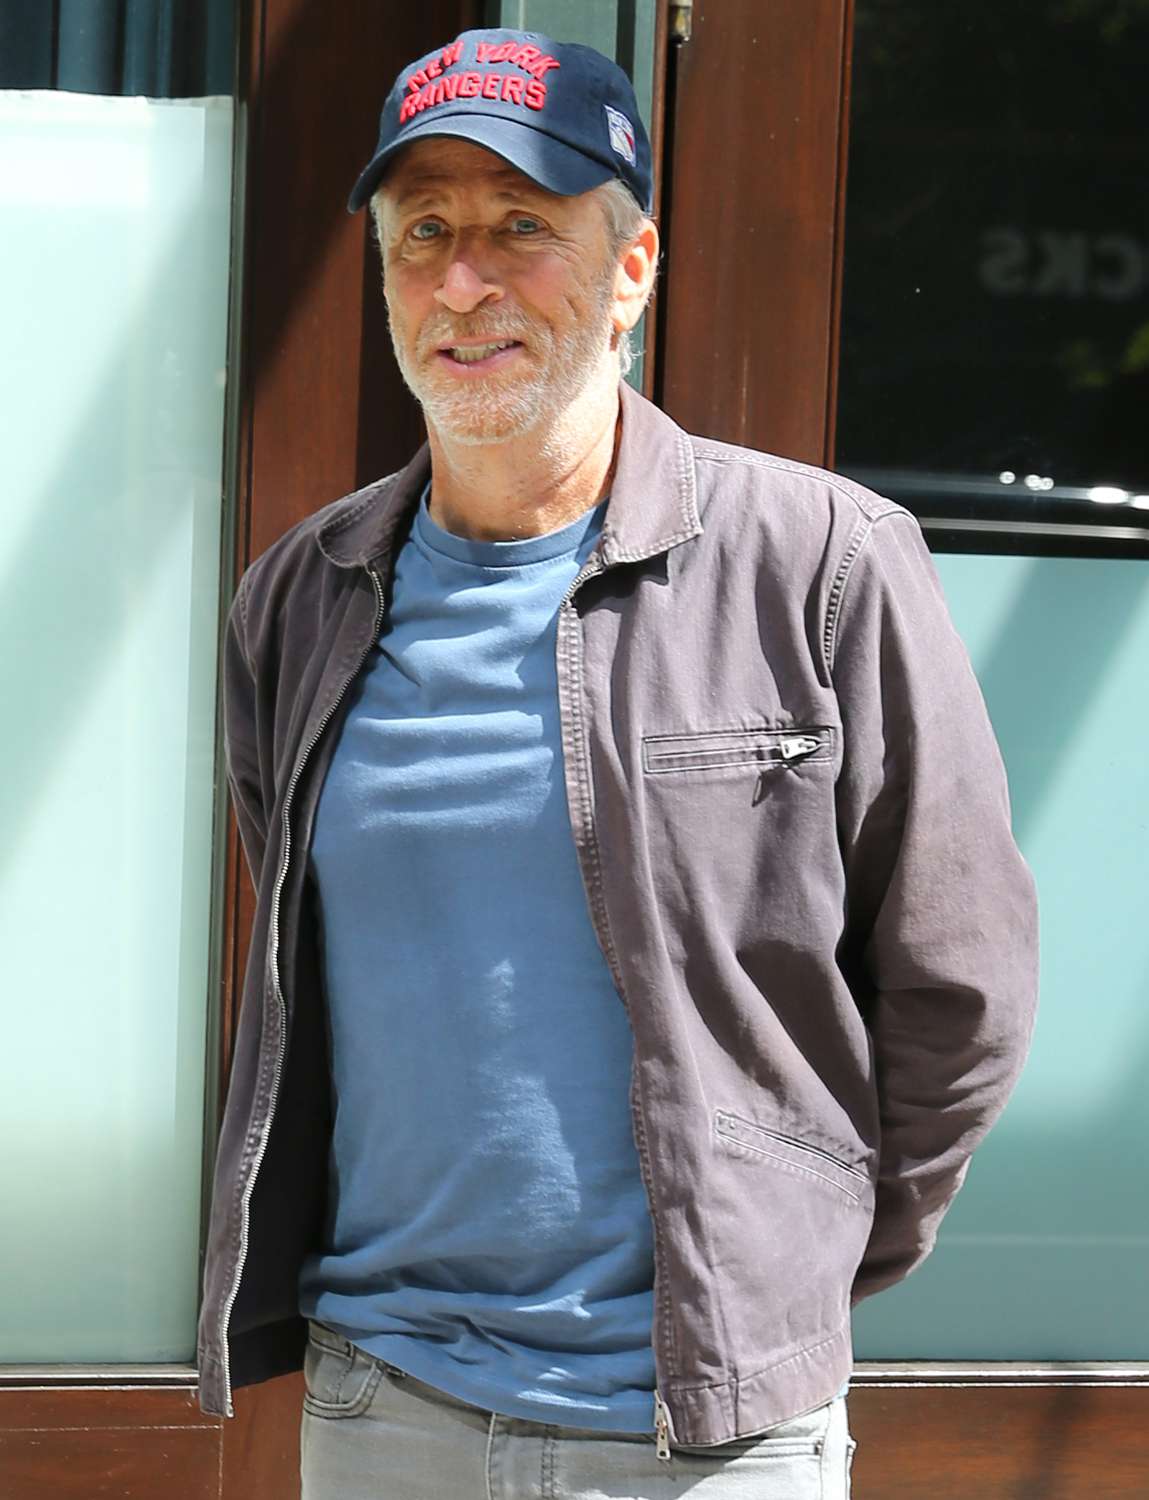 Jon Stewart leaves the Greenwich Hotel after interviewing Queen Noor in New York City.